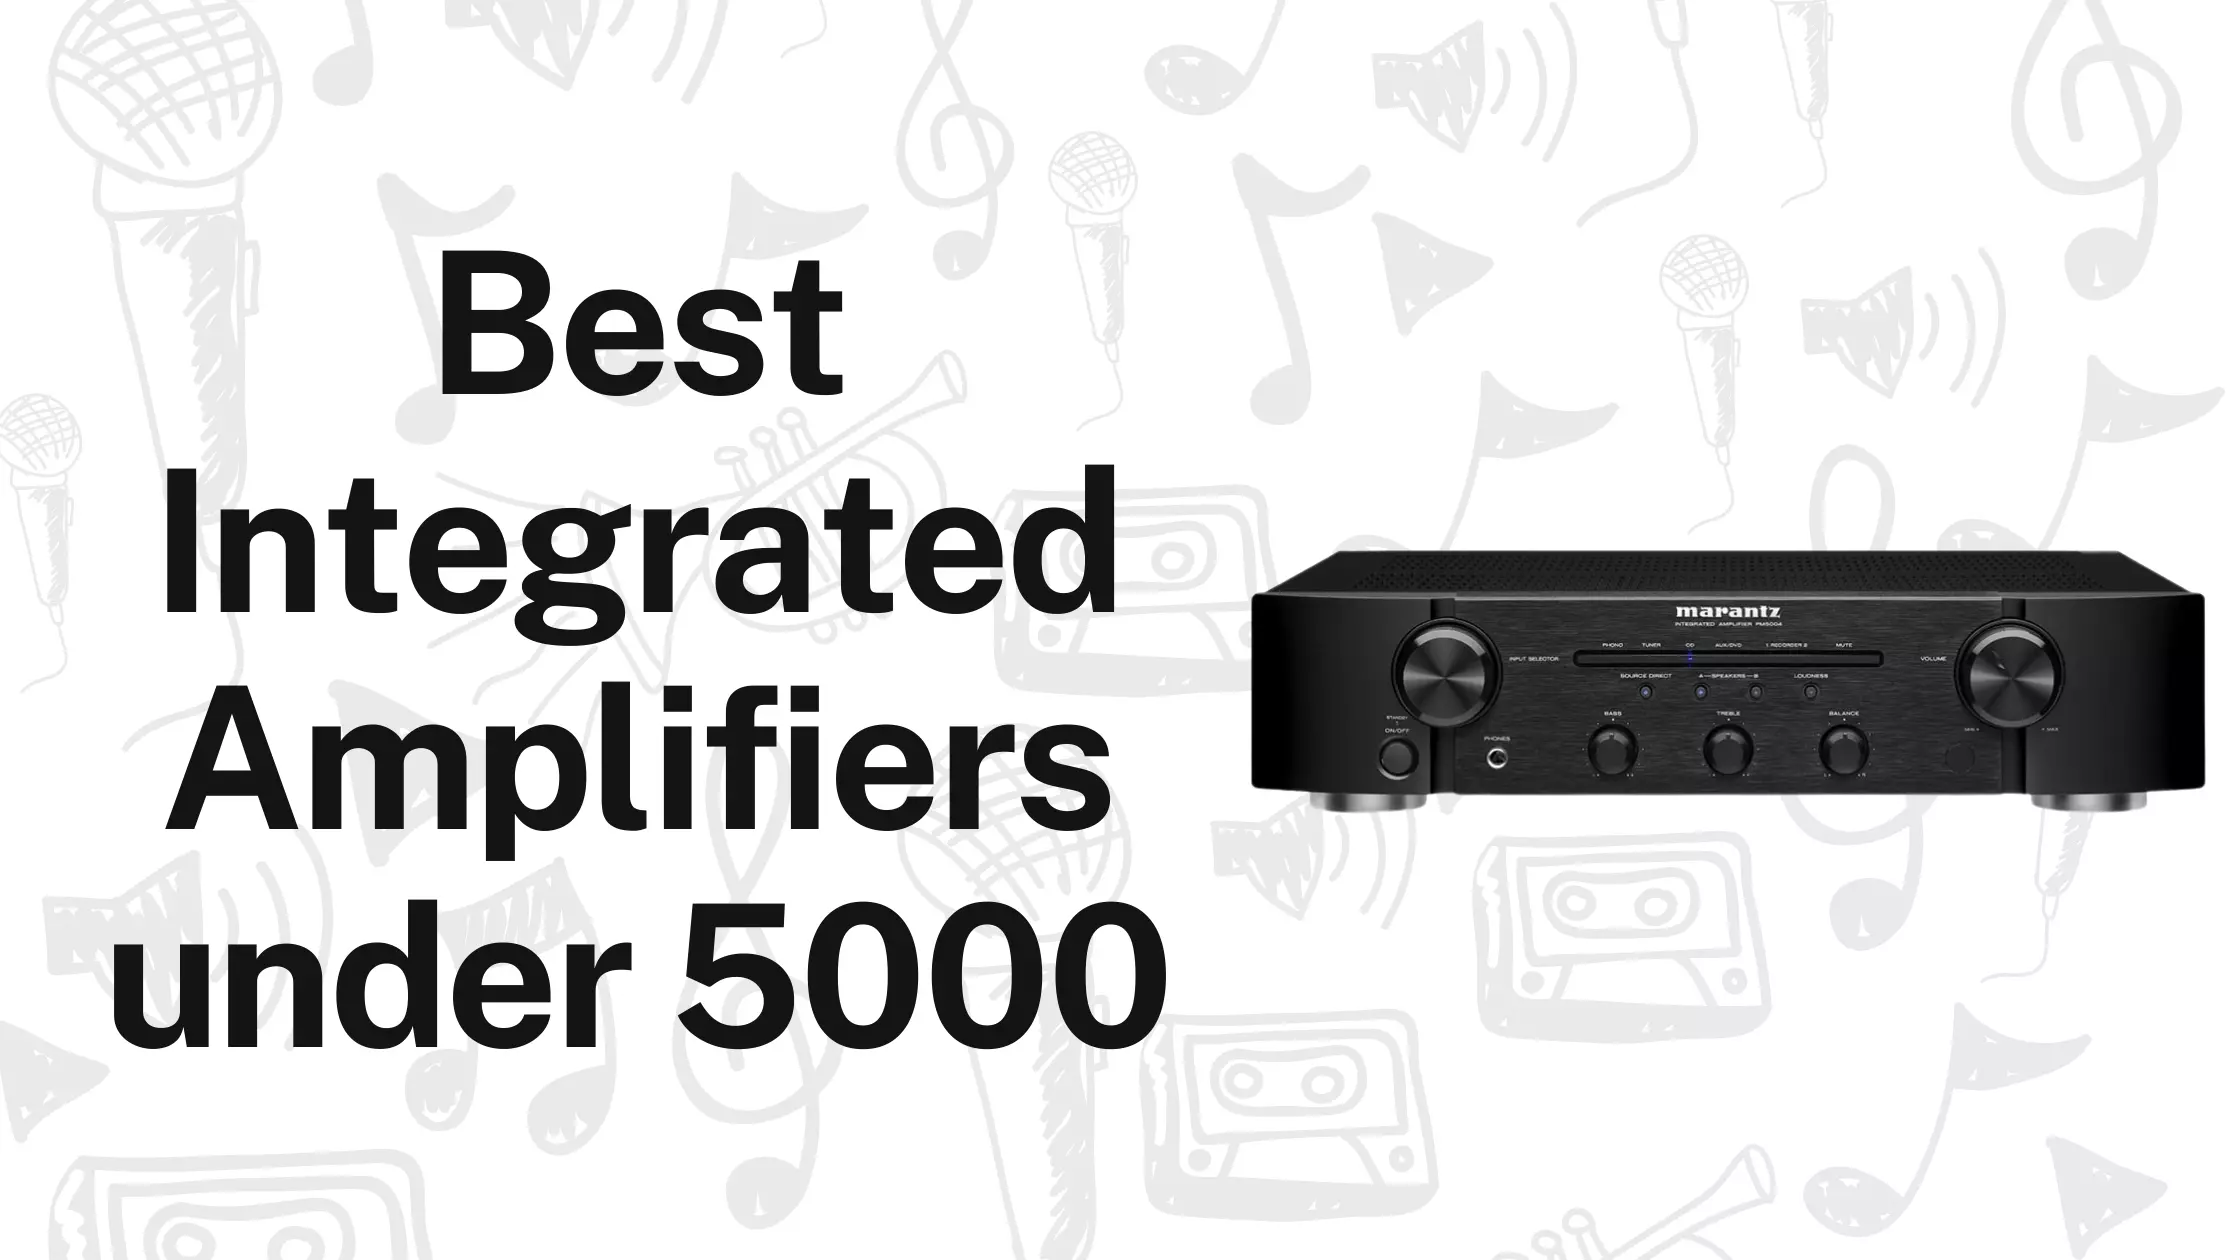 Best Integrated Amplifiers Under $5000 With Shopping Tips